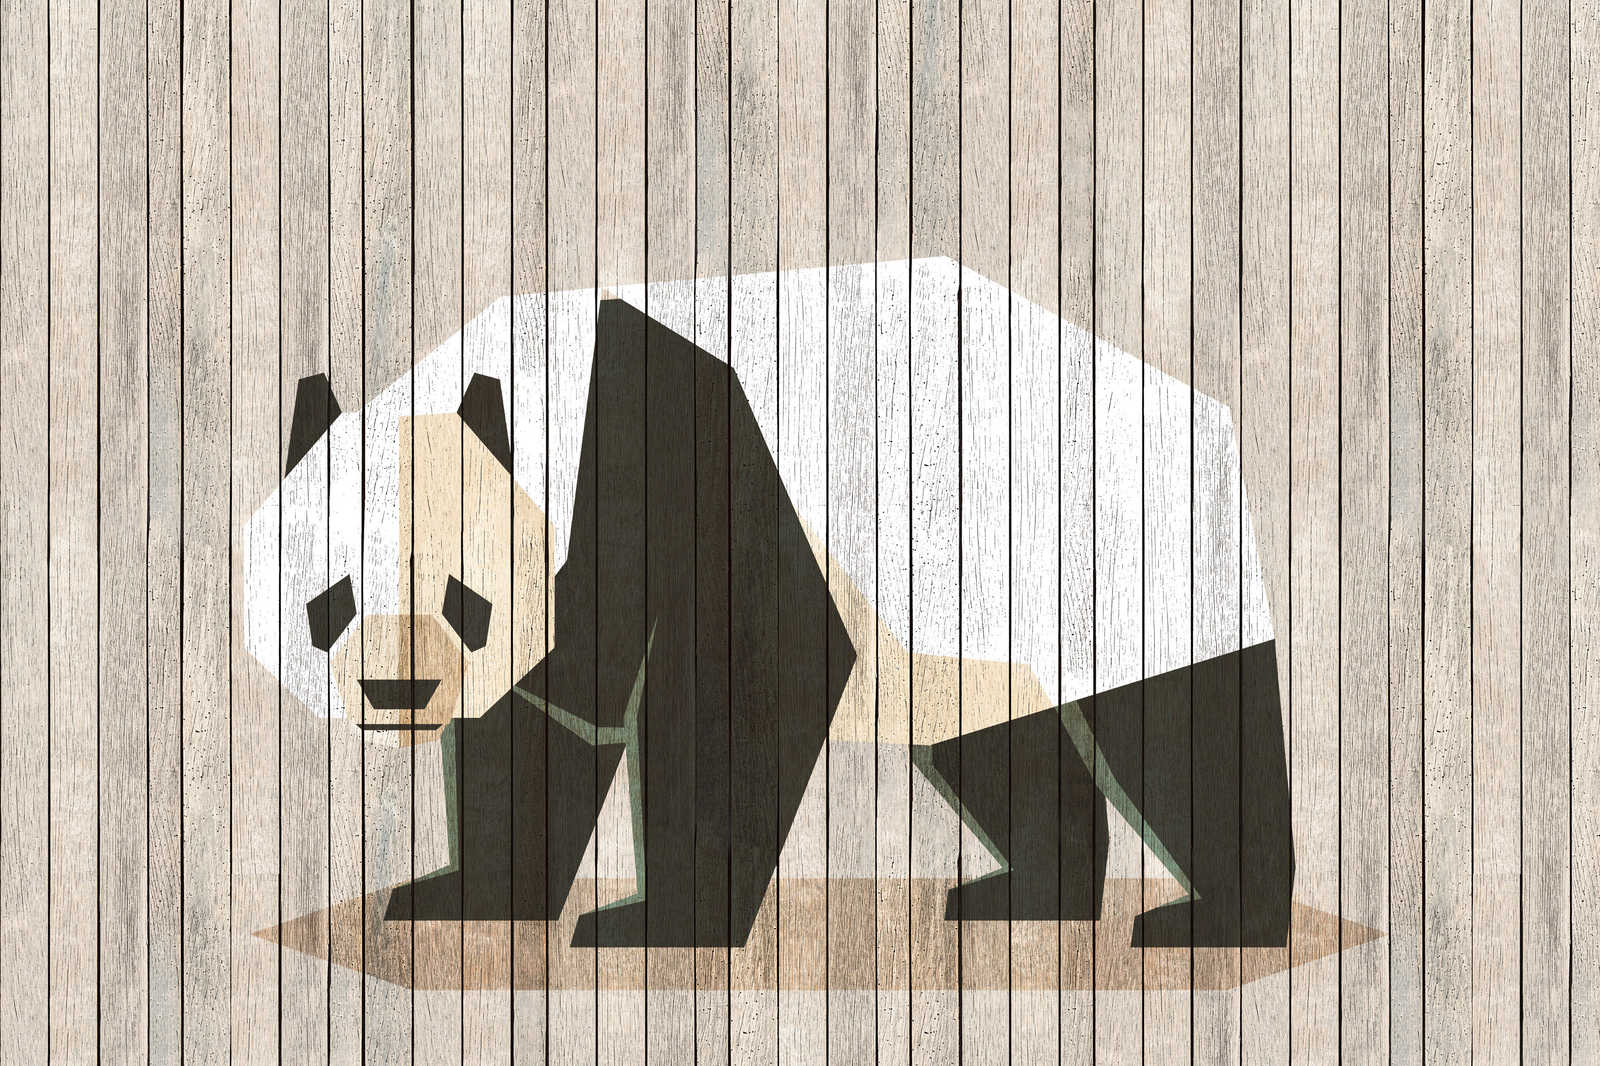             Born to Be Wild 2 - Canvas painting on wood panel structure with panda & board wall - 0.90 m x 0.60 m
        